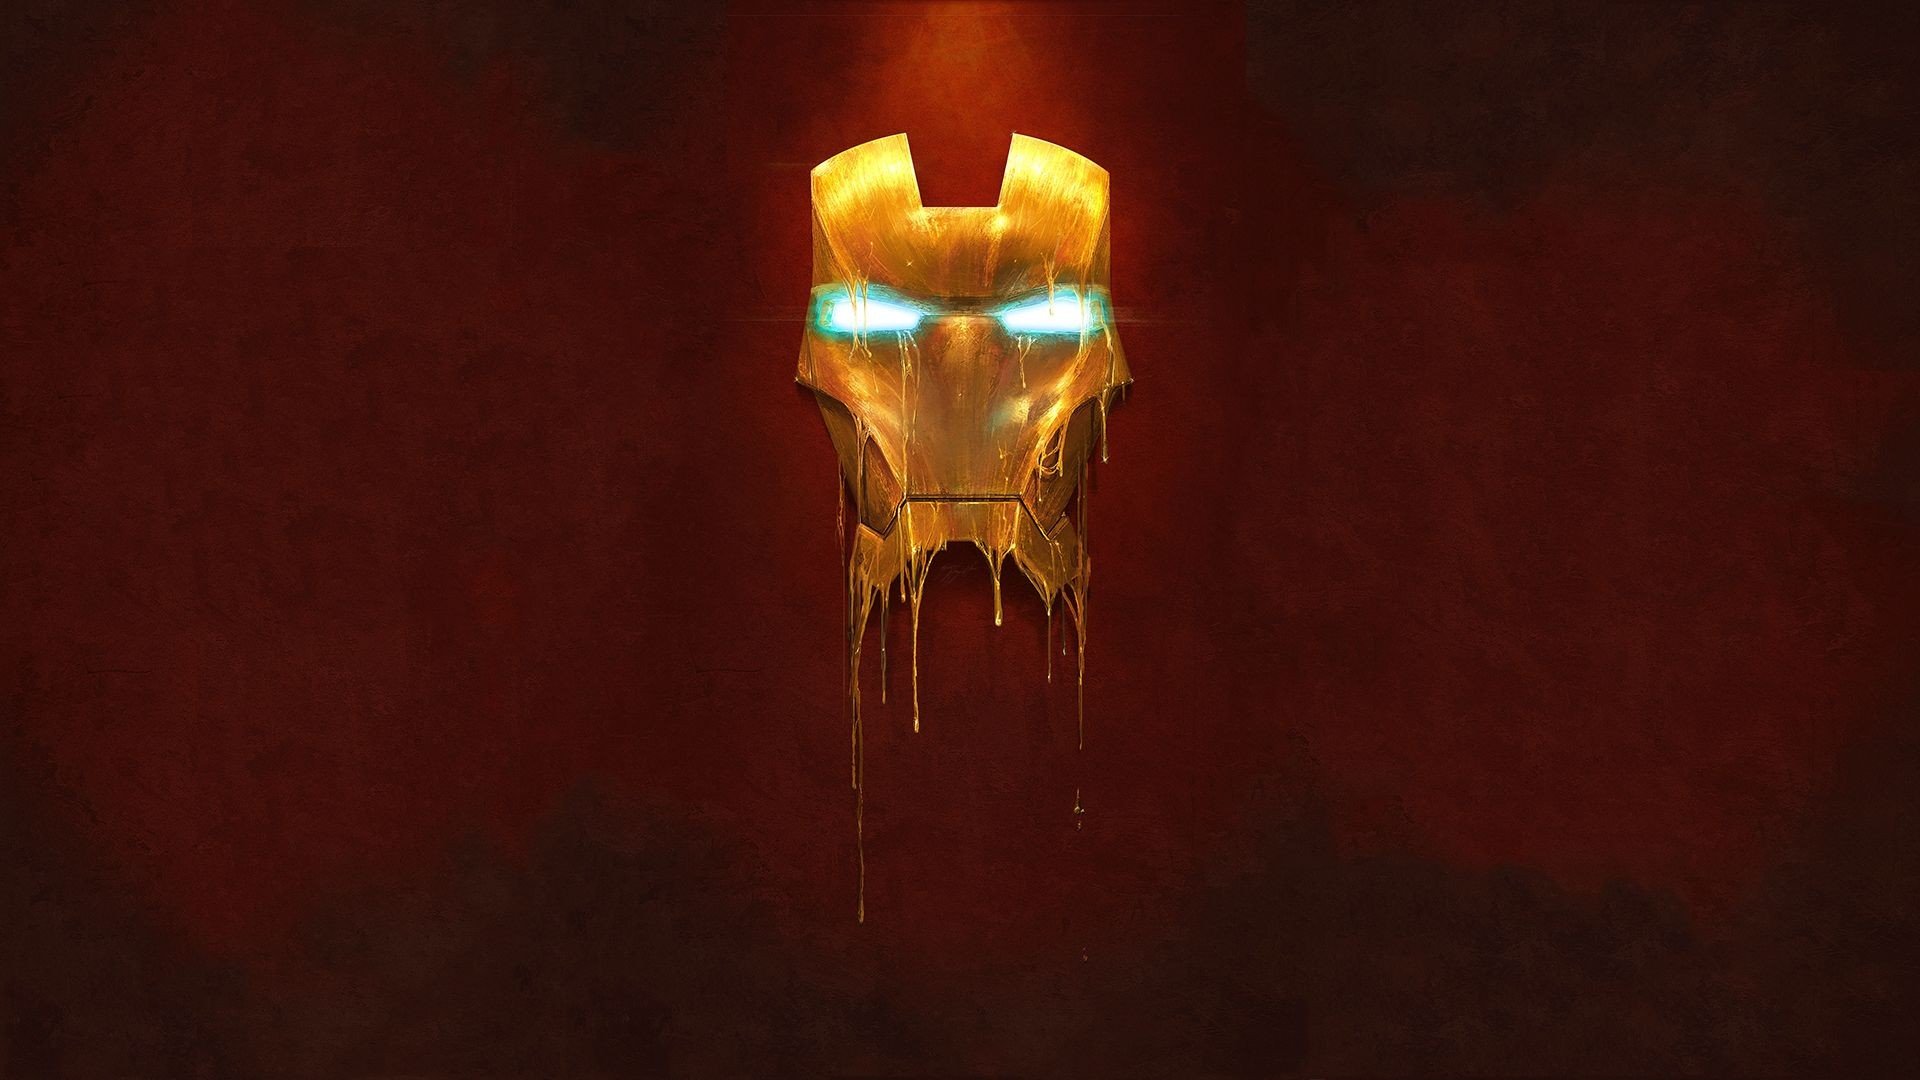 Free download Man 3 in theaters Ive collected some awesome Iron Man  wallpapers [1920x1080] for your Desktop, Mobile & Tablet | Explore 75+ Iron  Man Wallpapers | Iron Man Hd Wallpaper, Wallpaper